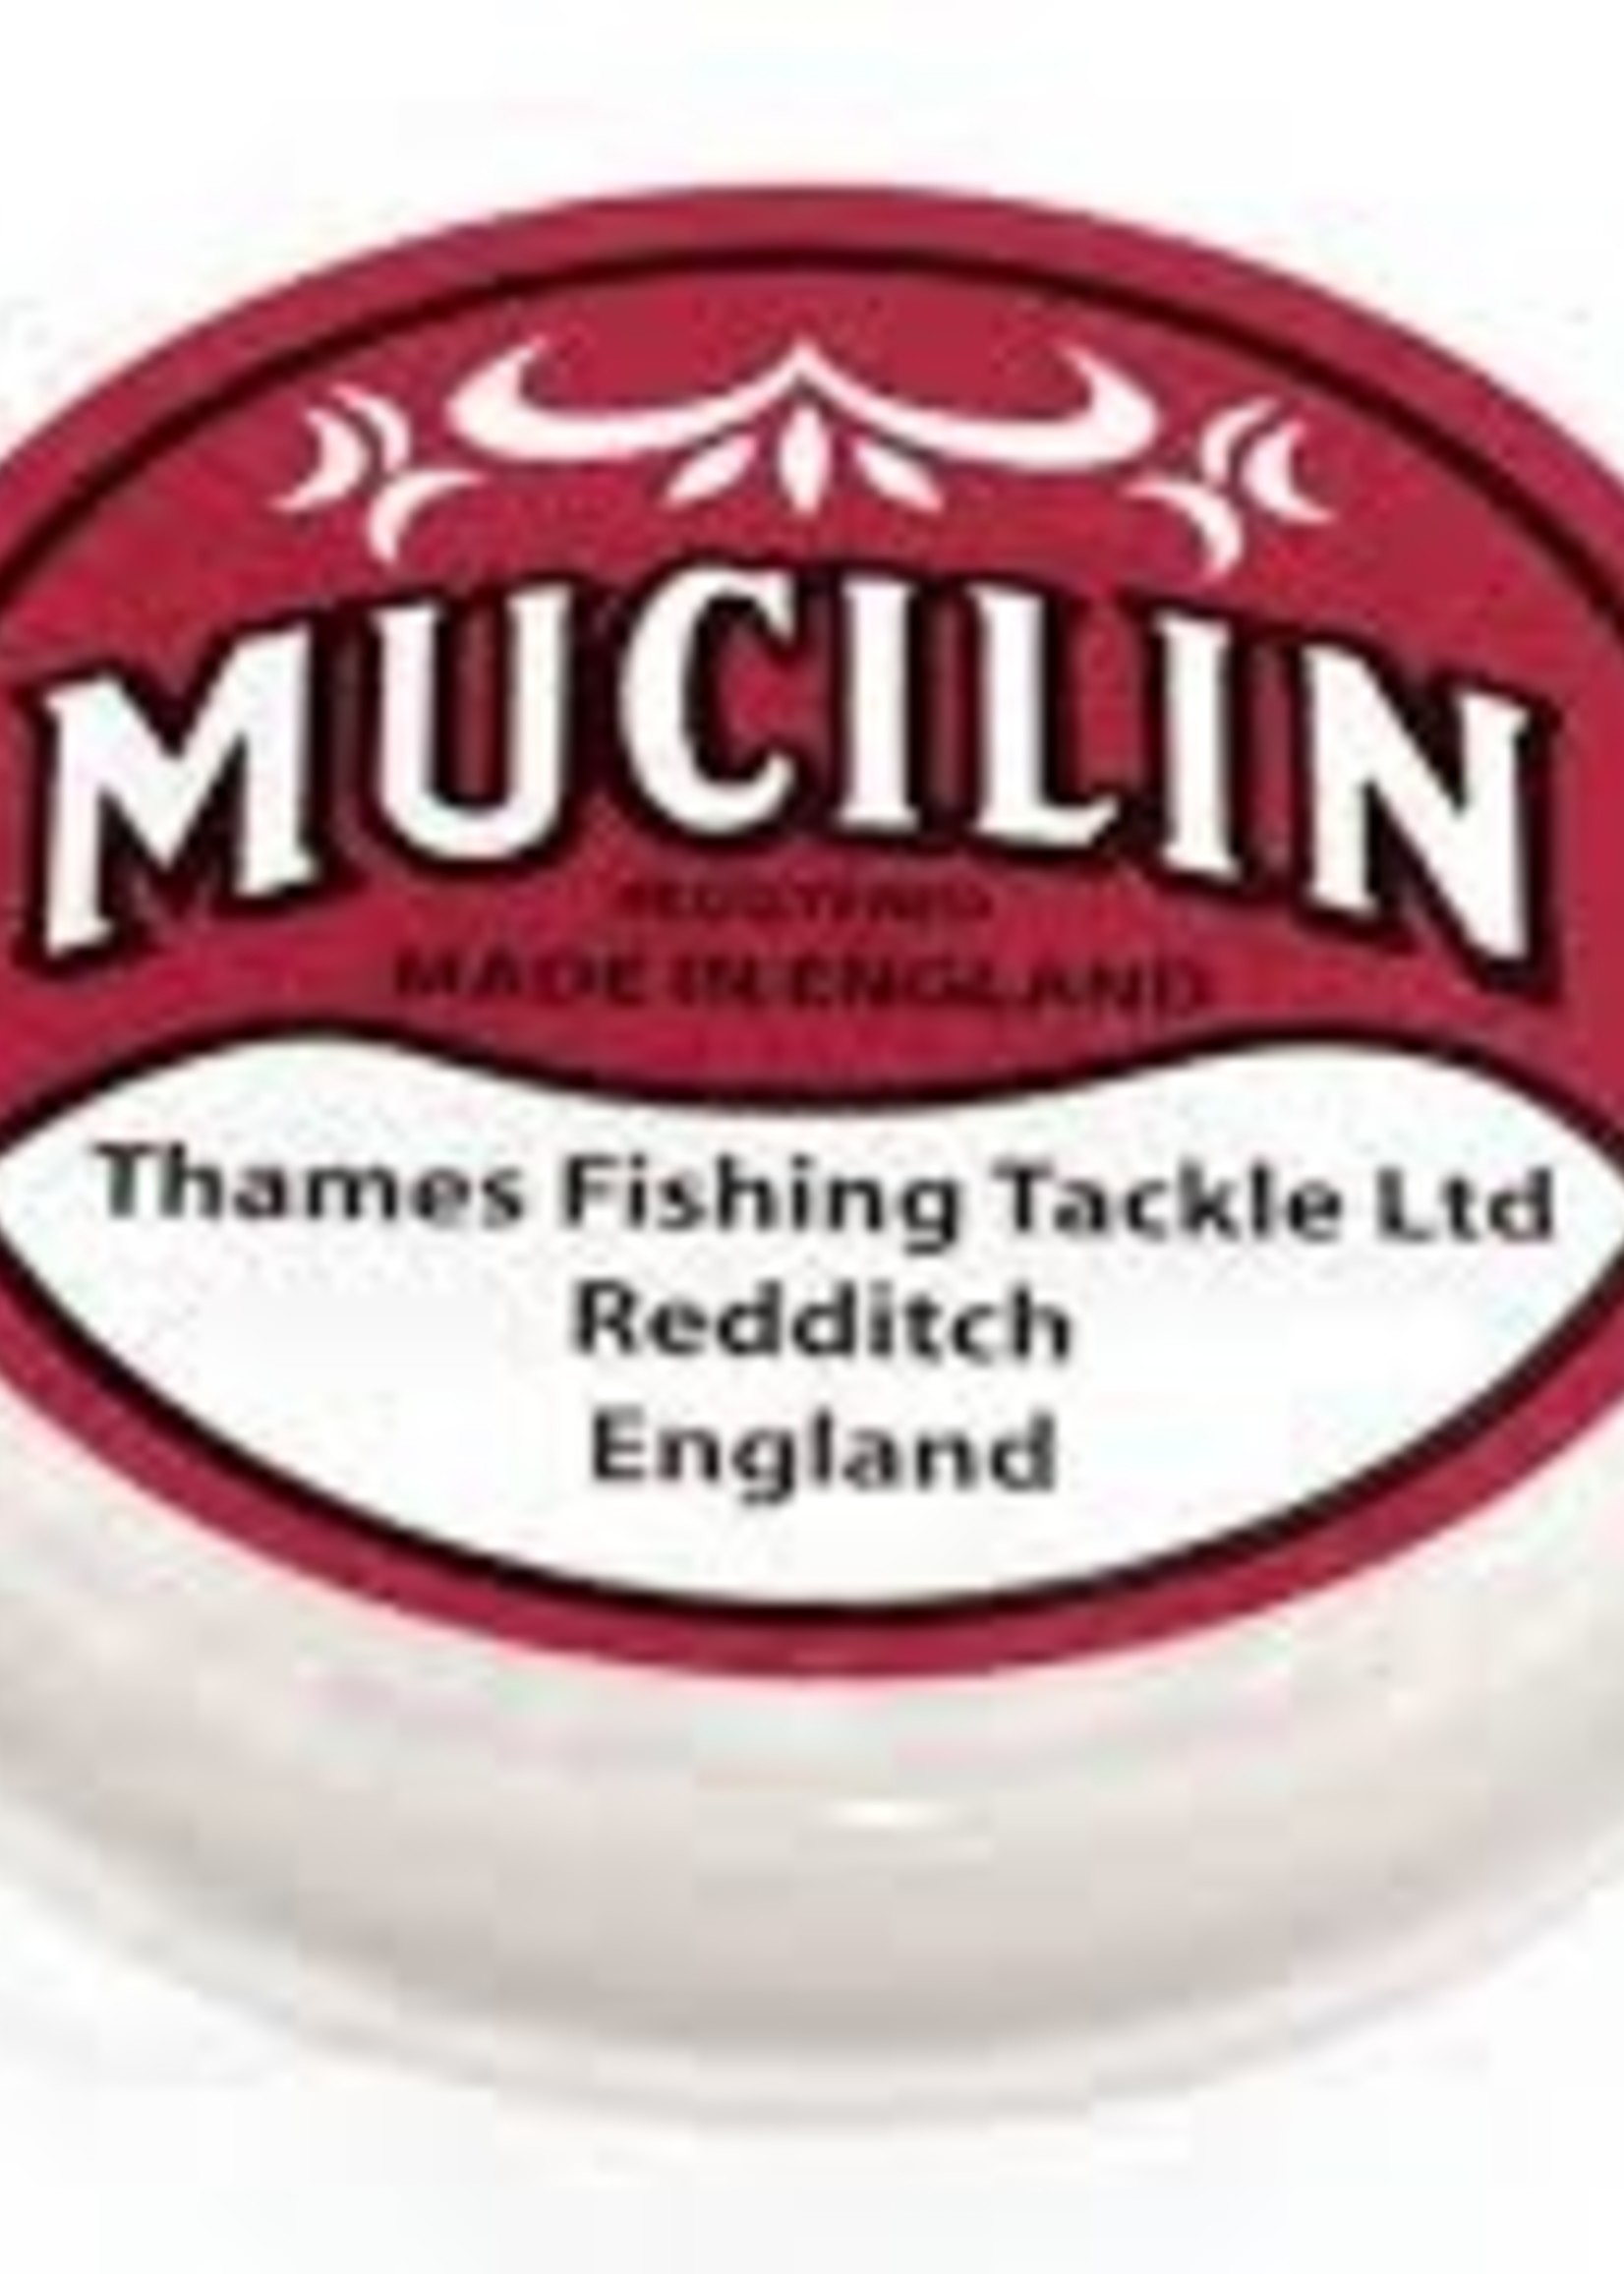 Thames Fishing Tackle Ltd. Mucilin Red